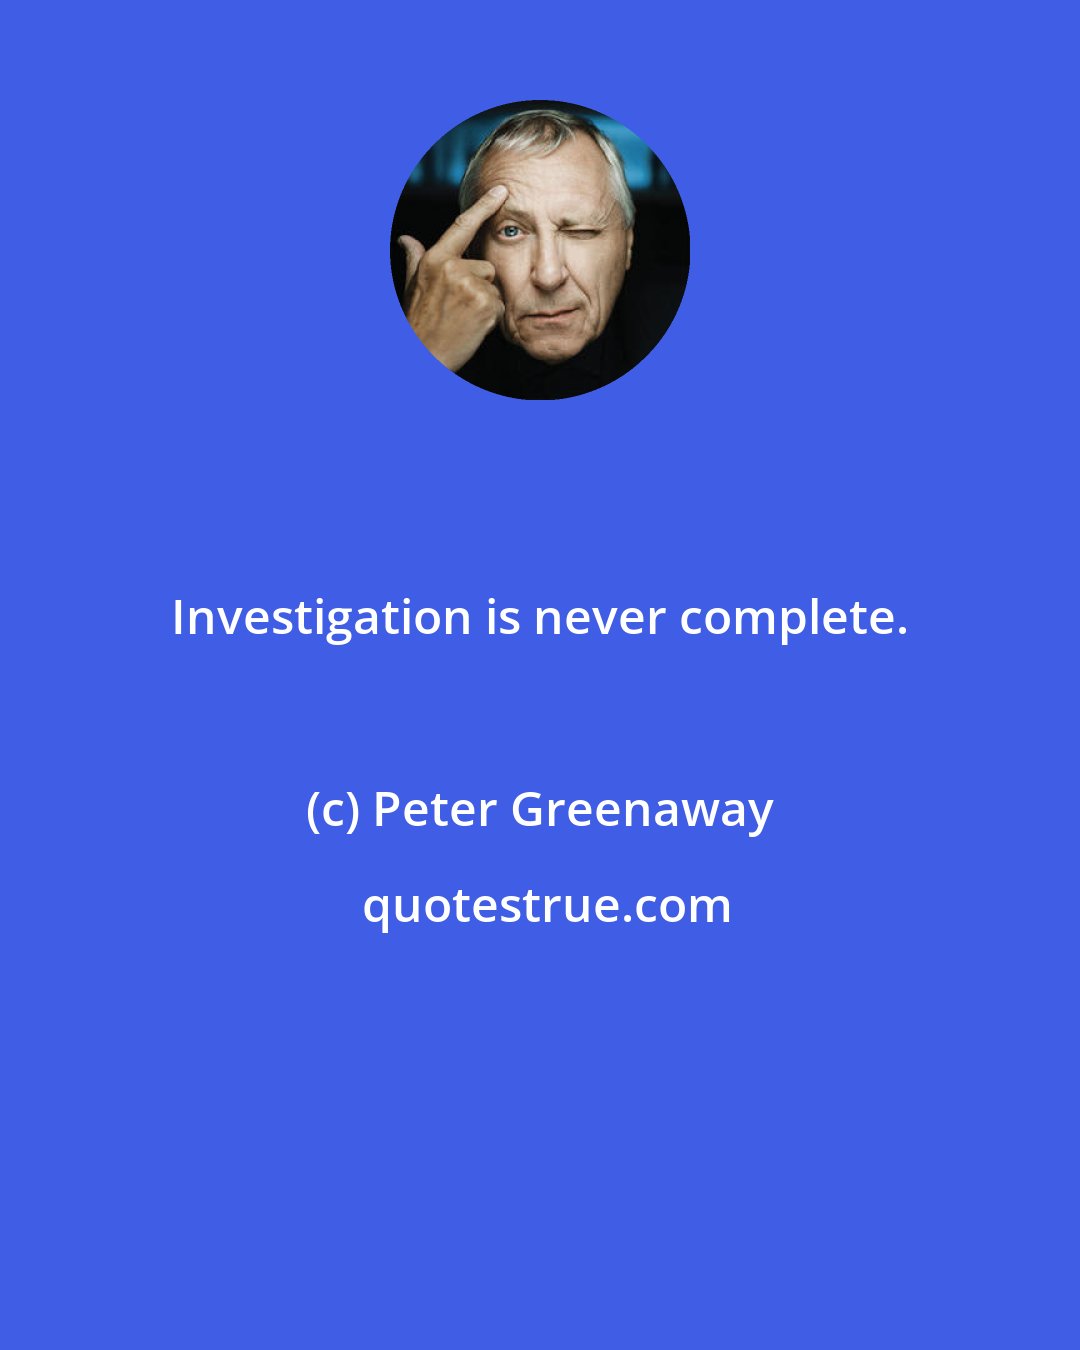 Peter Greenaway: Investigation is never complete.